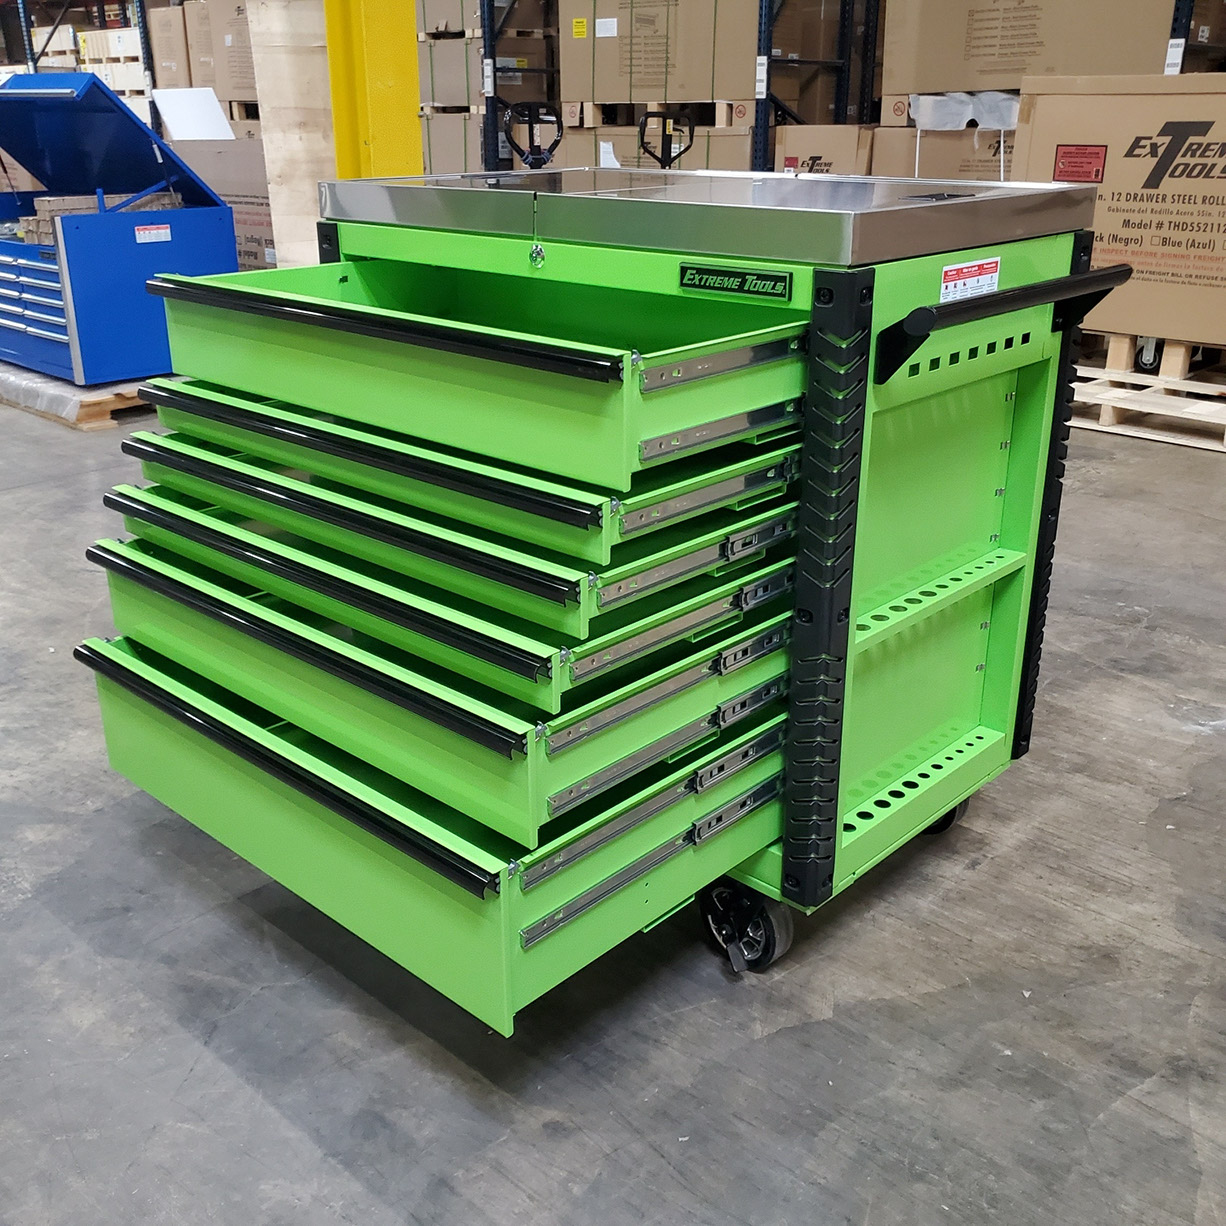 https://rockintoolboxes.com/wp-content/uploads/2020/05/Scratch-and-Dent-_-Extreme-Tools-41-x-25-6-Drawer-Slide-Top-Tool-Cart-SD-EX4106TCS-Green-with-Black-Drawer-Pulls_29.jpeg